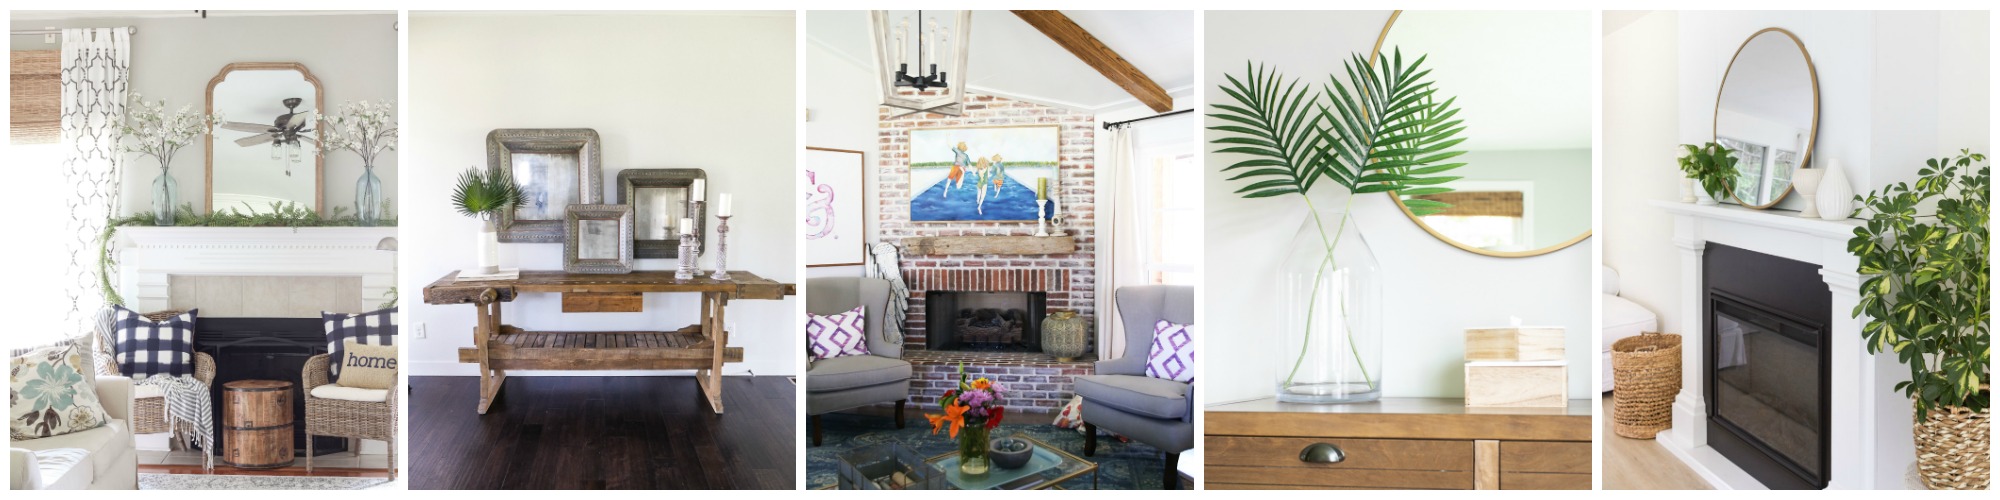 5 beautiful Summer vignettes and mantels with fresh new Summer decor inspiration